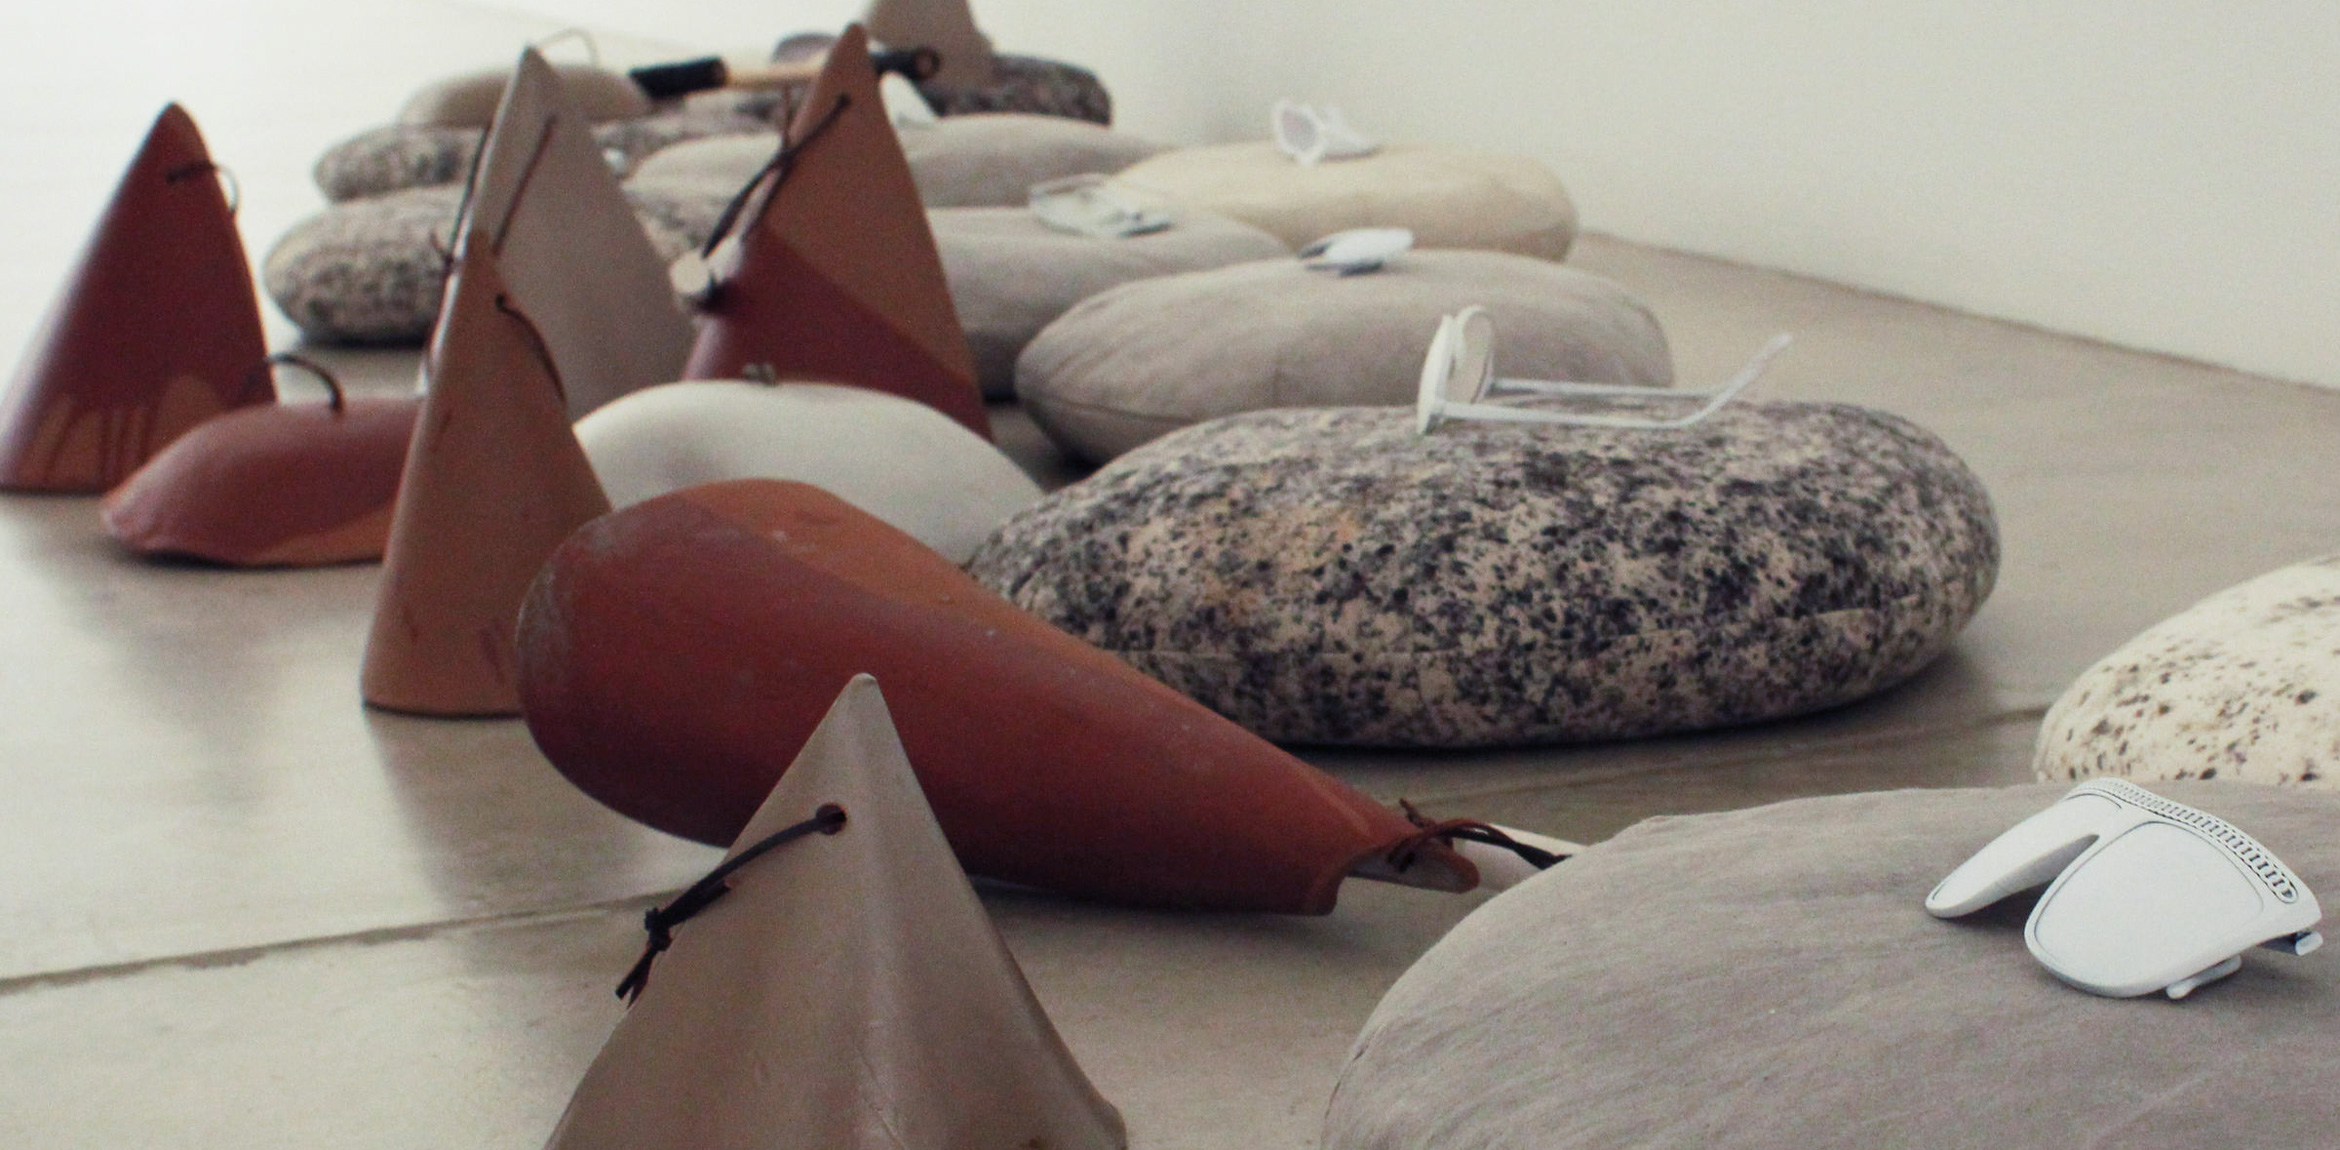 Chris Kallmyer's clay cone bells stand on the floor among meditation pillows holding sensory deprivation glasses.